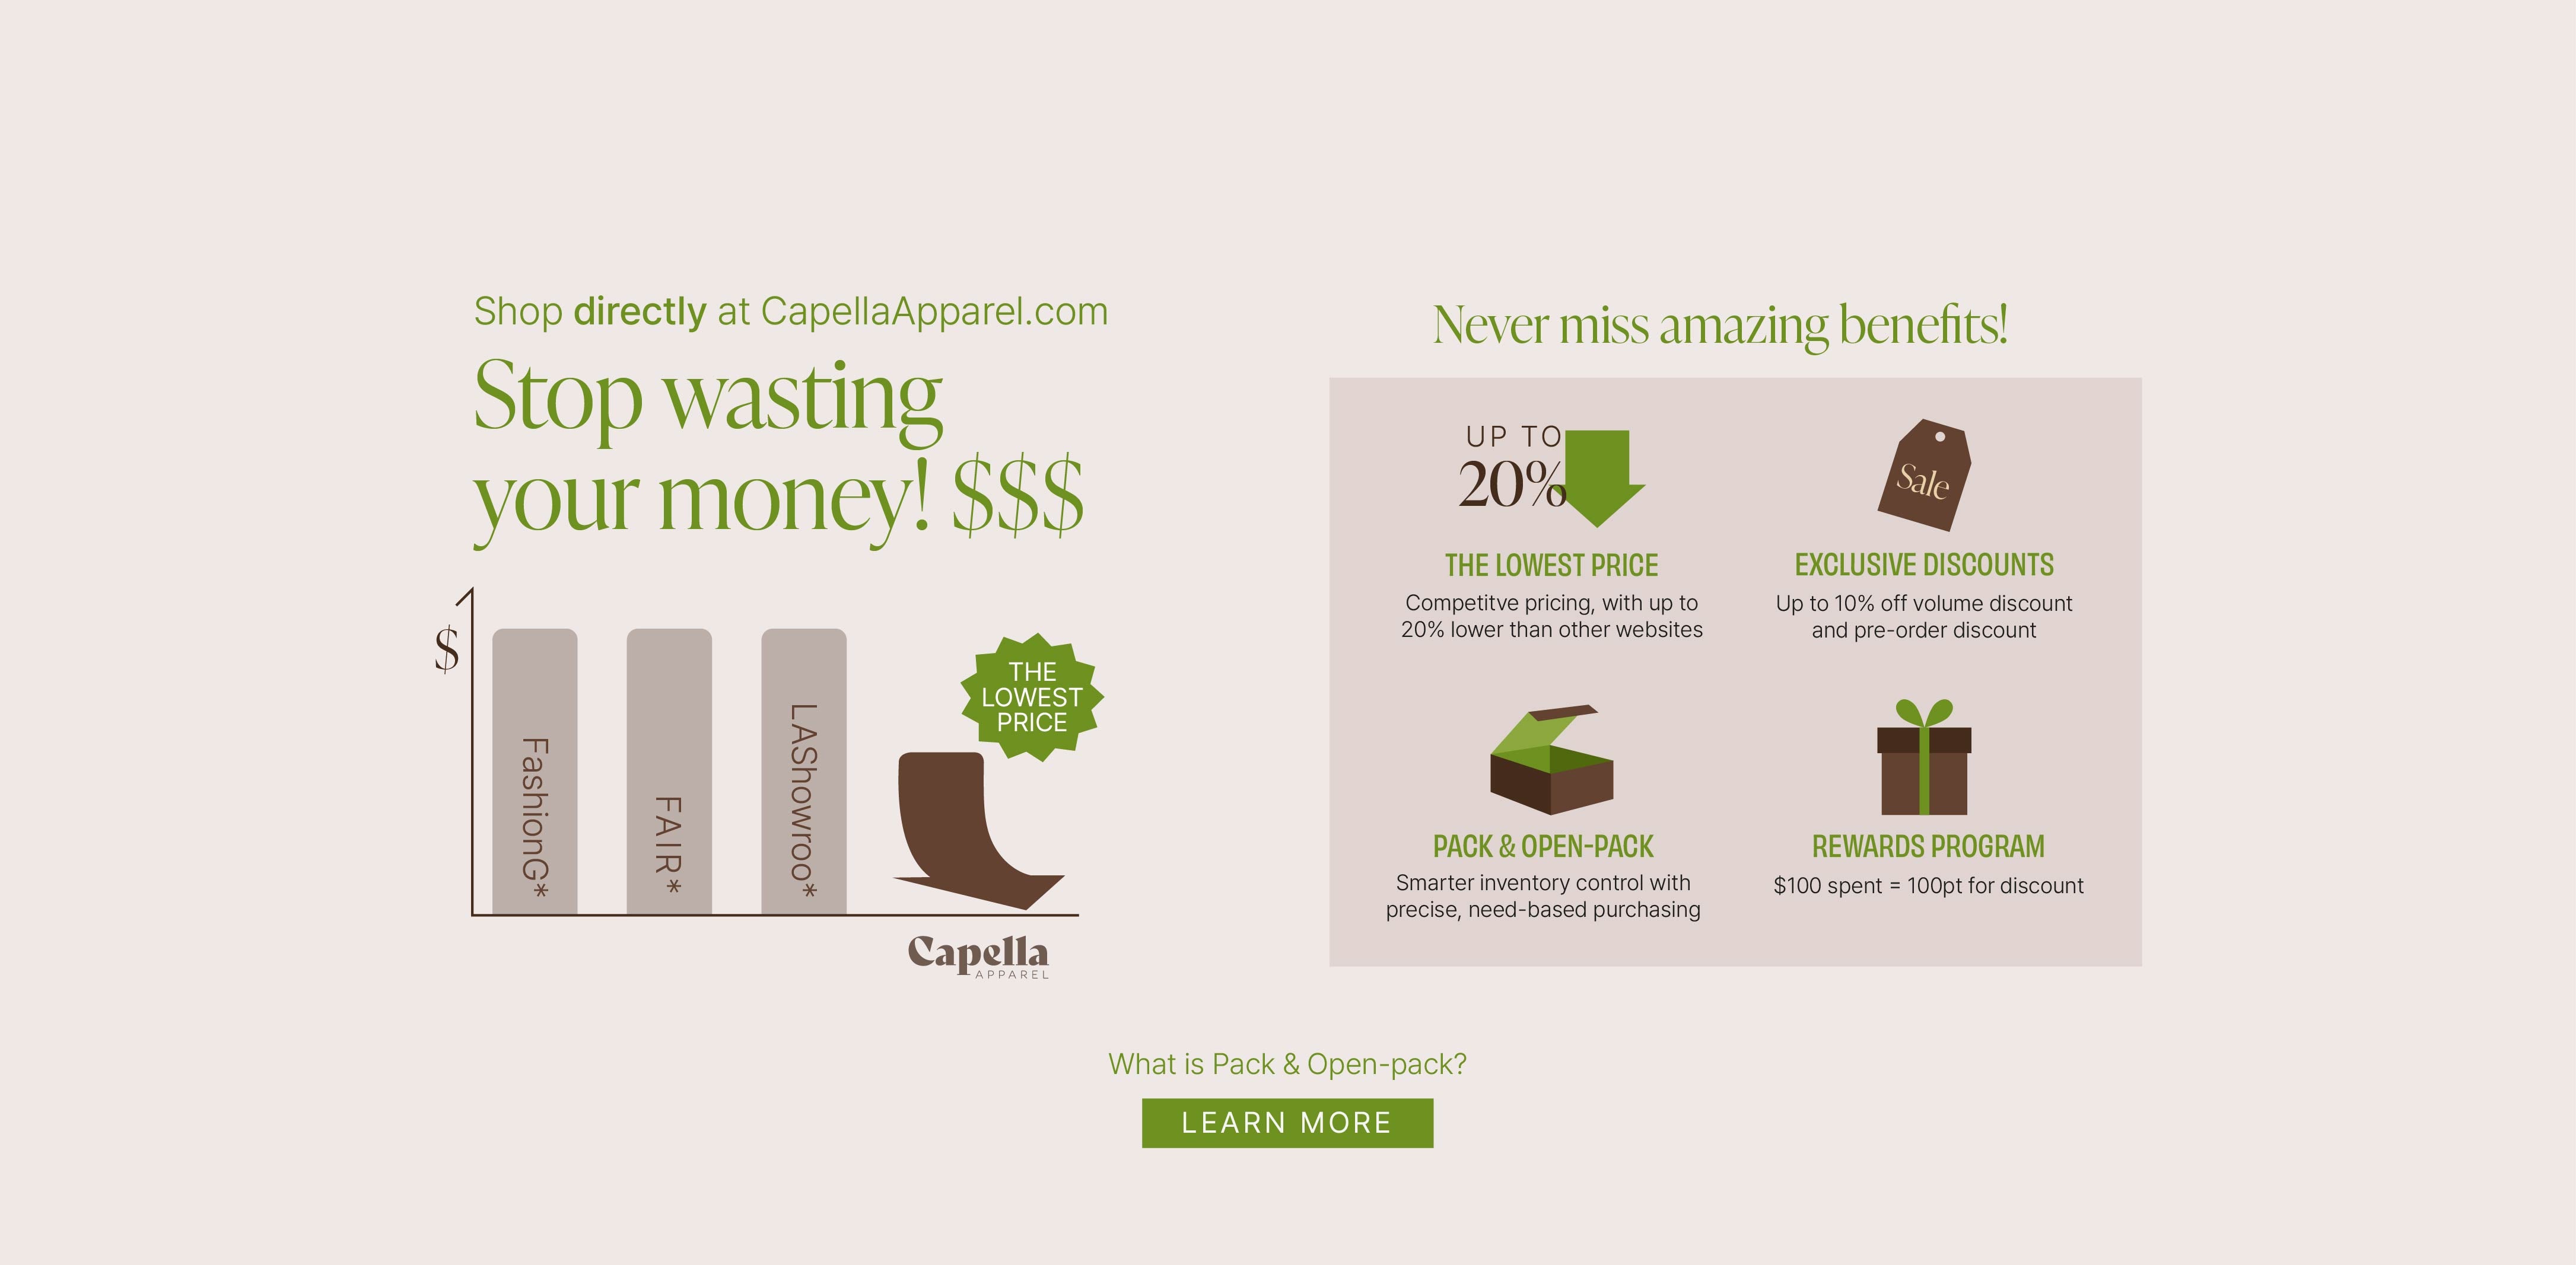 Stop wasting money by shopping at CapellaApparel.com